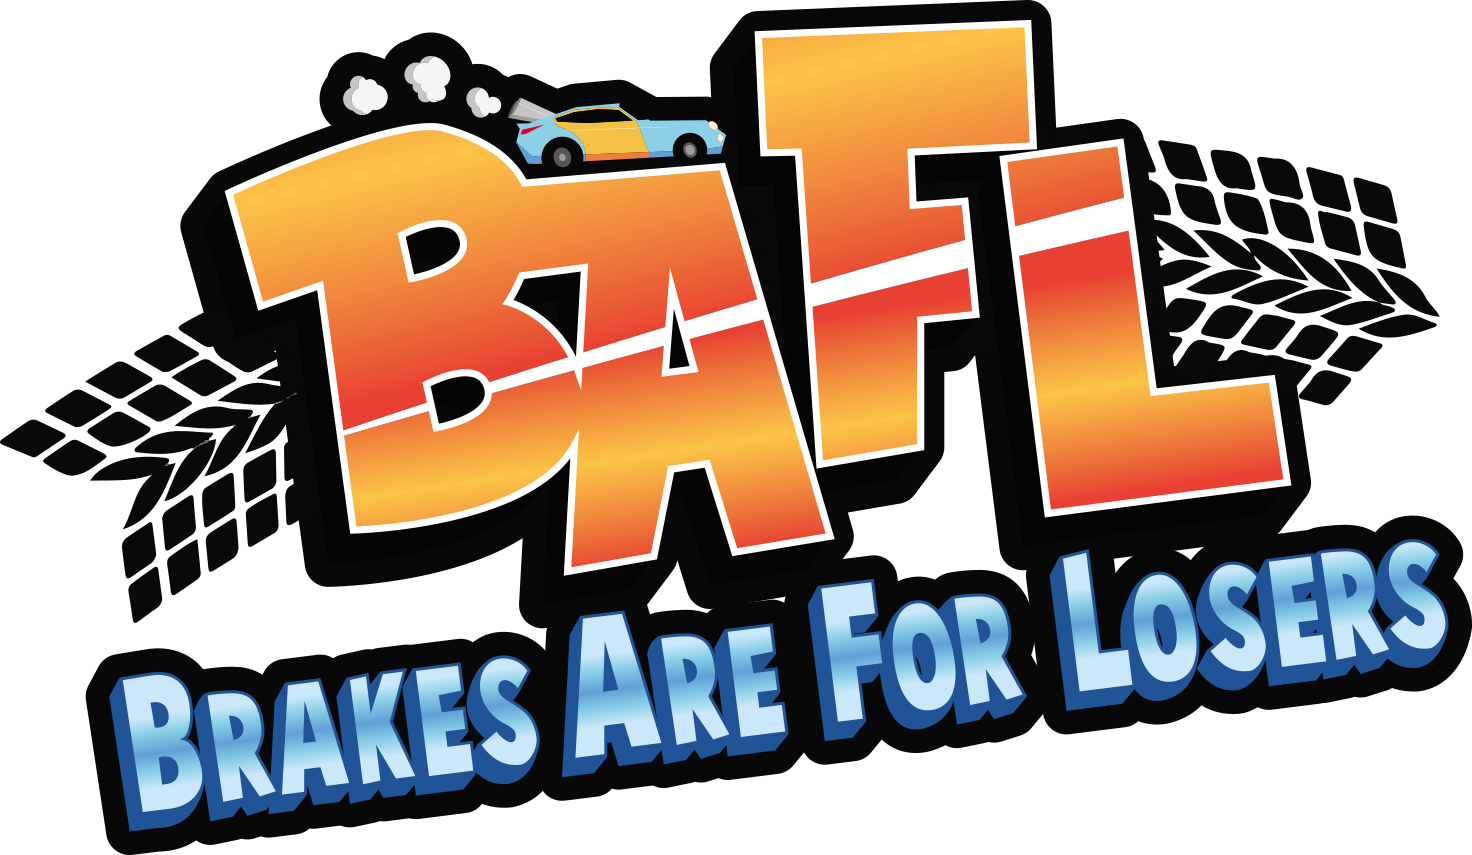 Breaks Are For Losers Logo - Bafl: Brakes Are For Losers (1472x855)